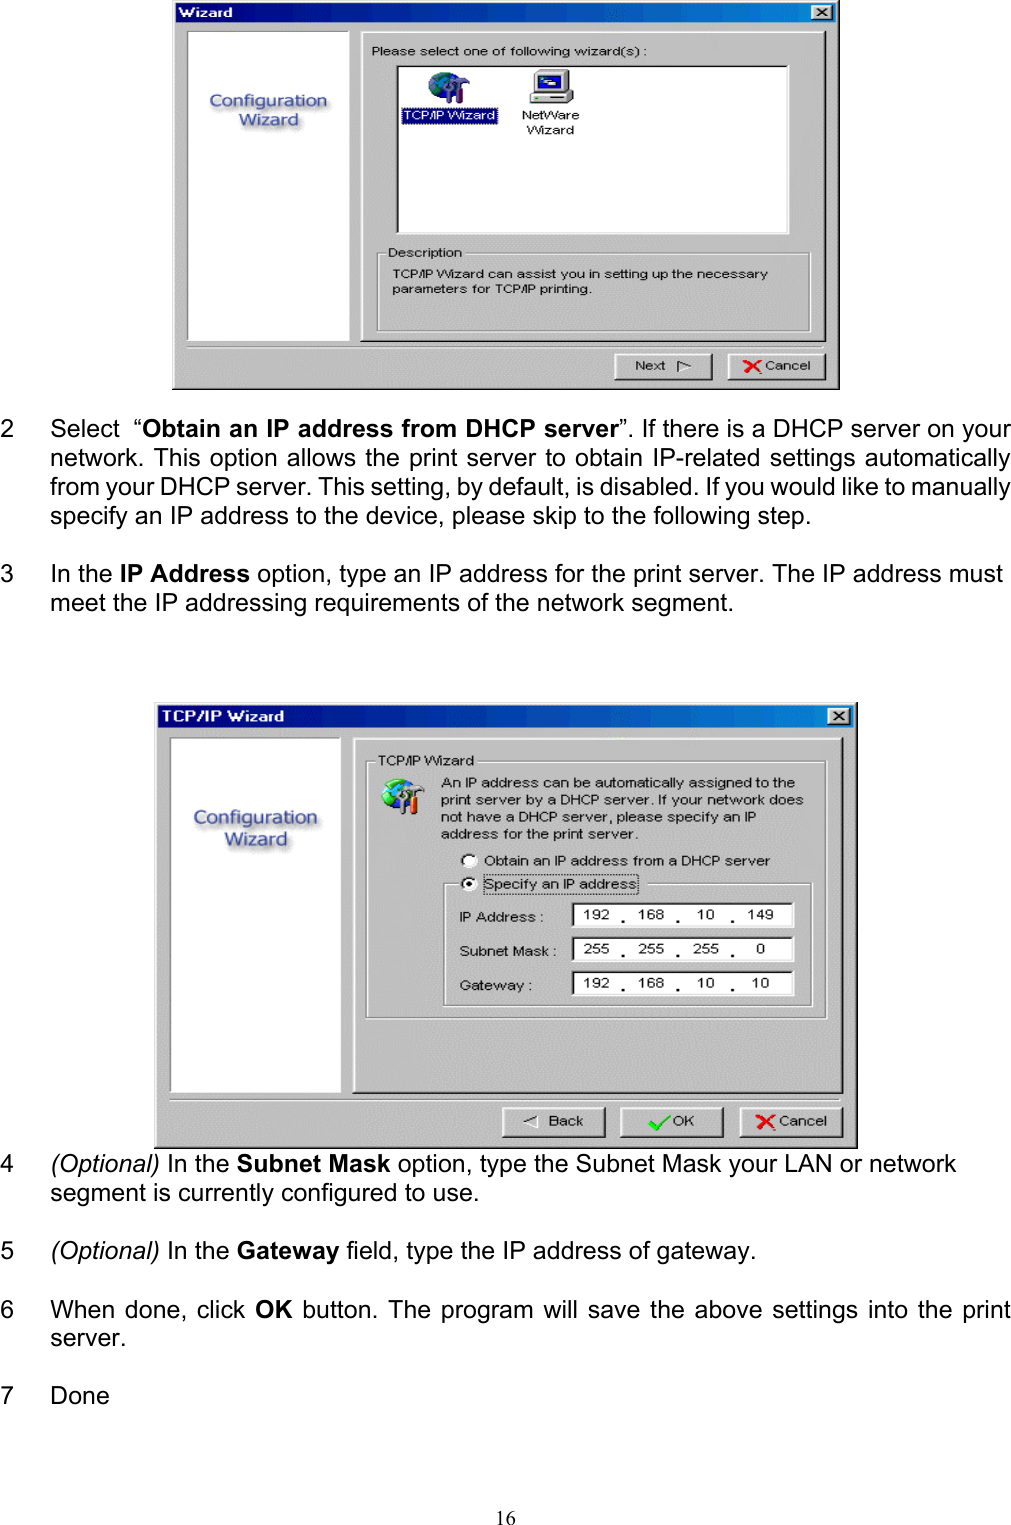   16  2  Select  “Obtain an IP address from DHCP server”. If there is a DHCP server on your network. This option allows the print server to obtain IP-related settings automatically from your DHCP server. This setting, by default, is disabled. If you would like to manually specify an IP address to the device, please skip to the following step.  3 In the IP Address option, type an IP address for the print server. The IP address must meet the IP addressing requirements of the network segment.     4  (Optional) In the Subnet Mask option, type the Subnet Mask your LAN or network segment is currently configured to use.  5  (Optional) In the Gateway field, type the IP address of gateway.  6  When done, click OK button. The program will save the above settings into the print server.  7 Done  